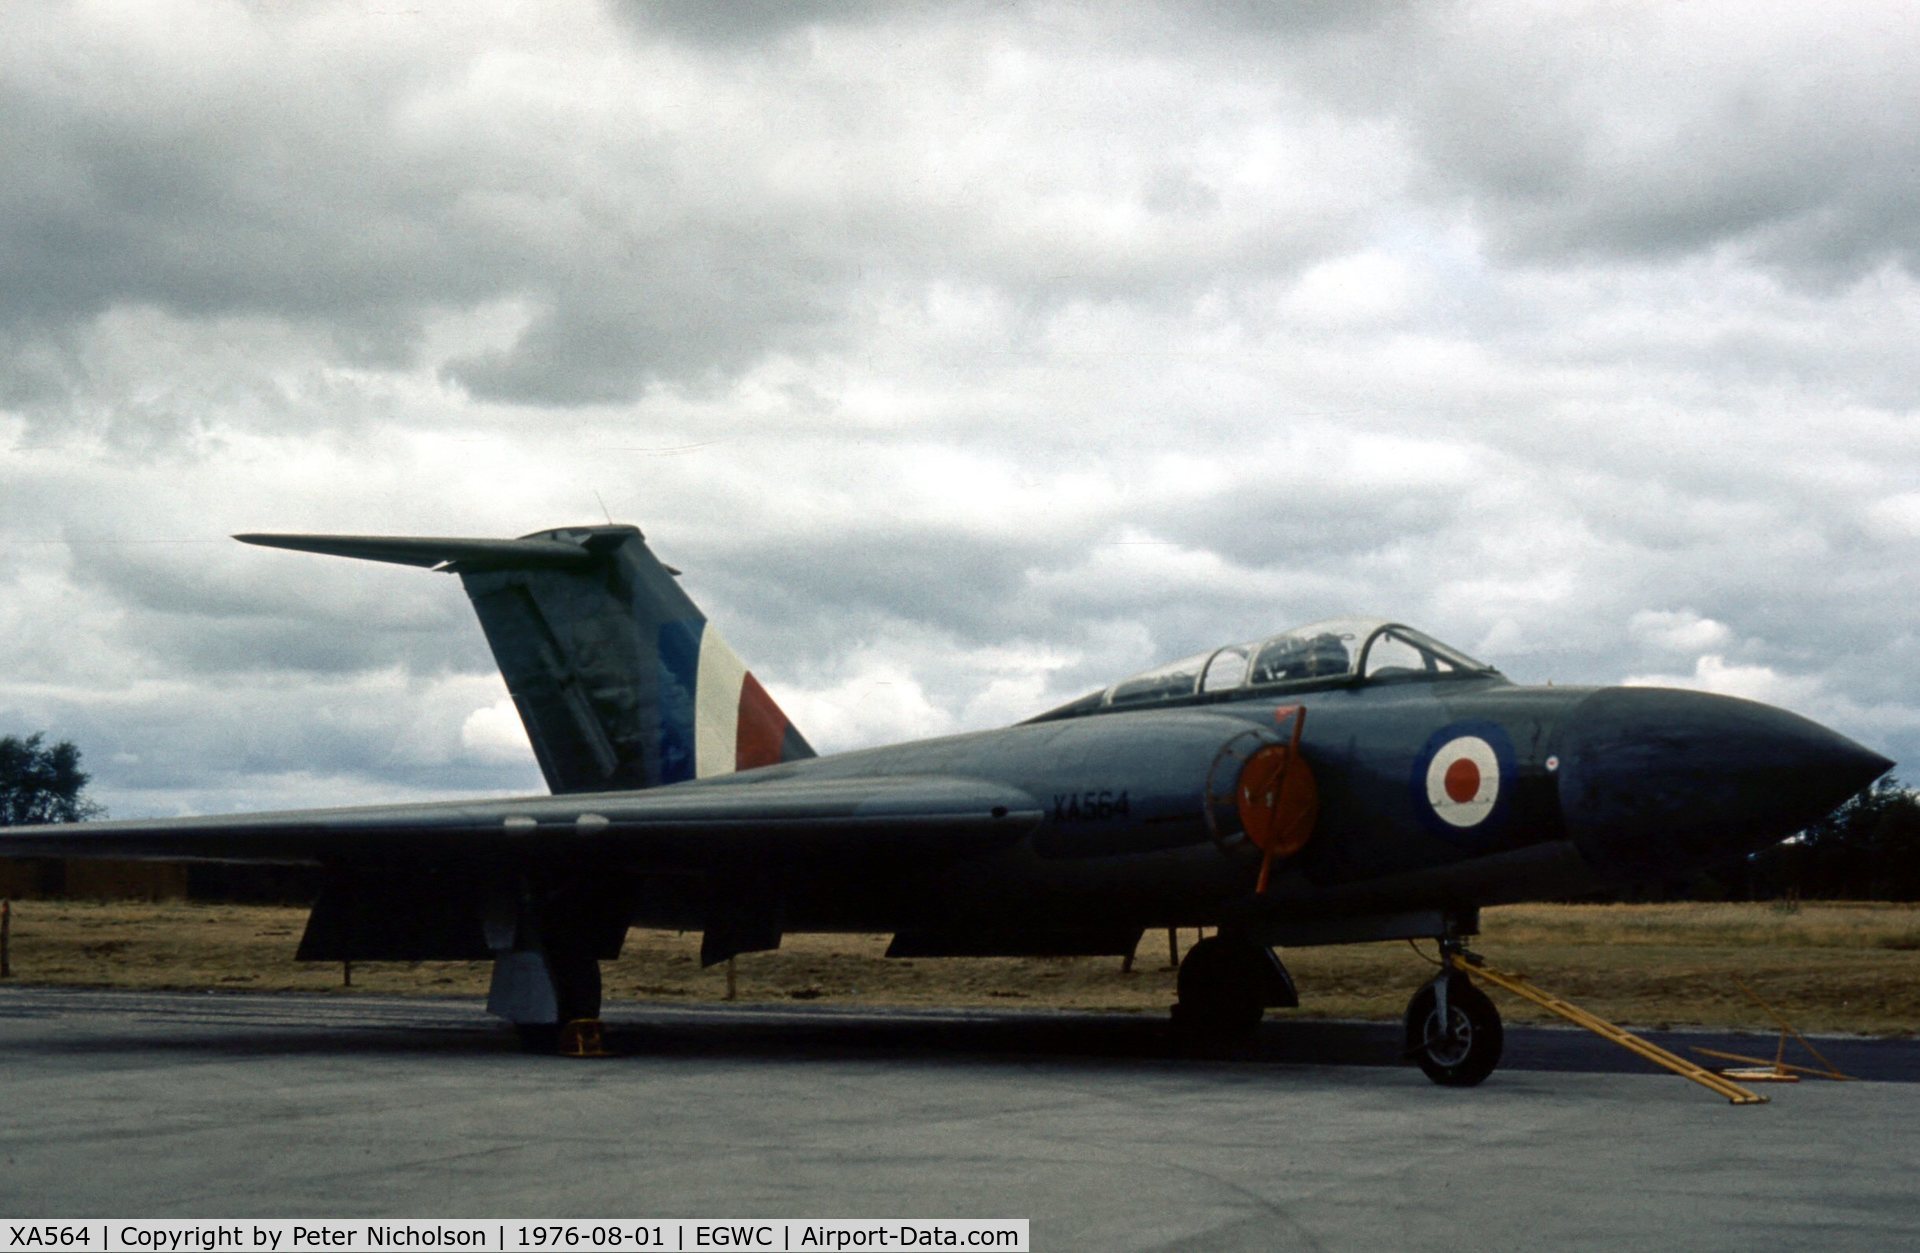 XA564, Gloster Javelin FAW.1 C/N Not found XA564, Javelin FAW.1 on display at Cosford in the Summer of 1976.